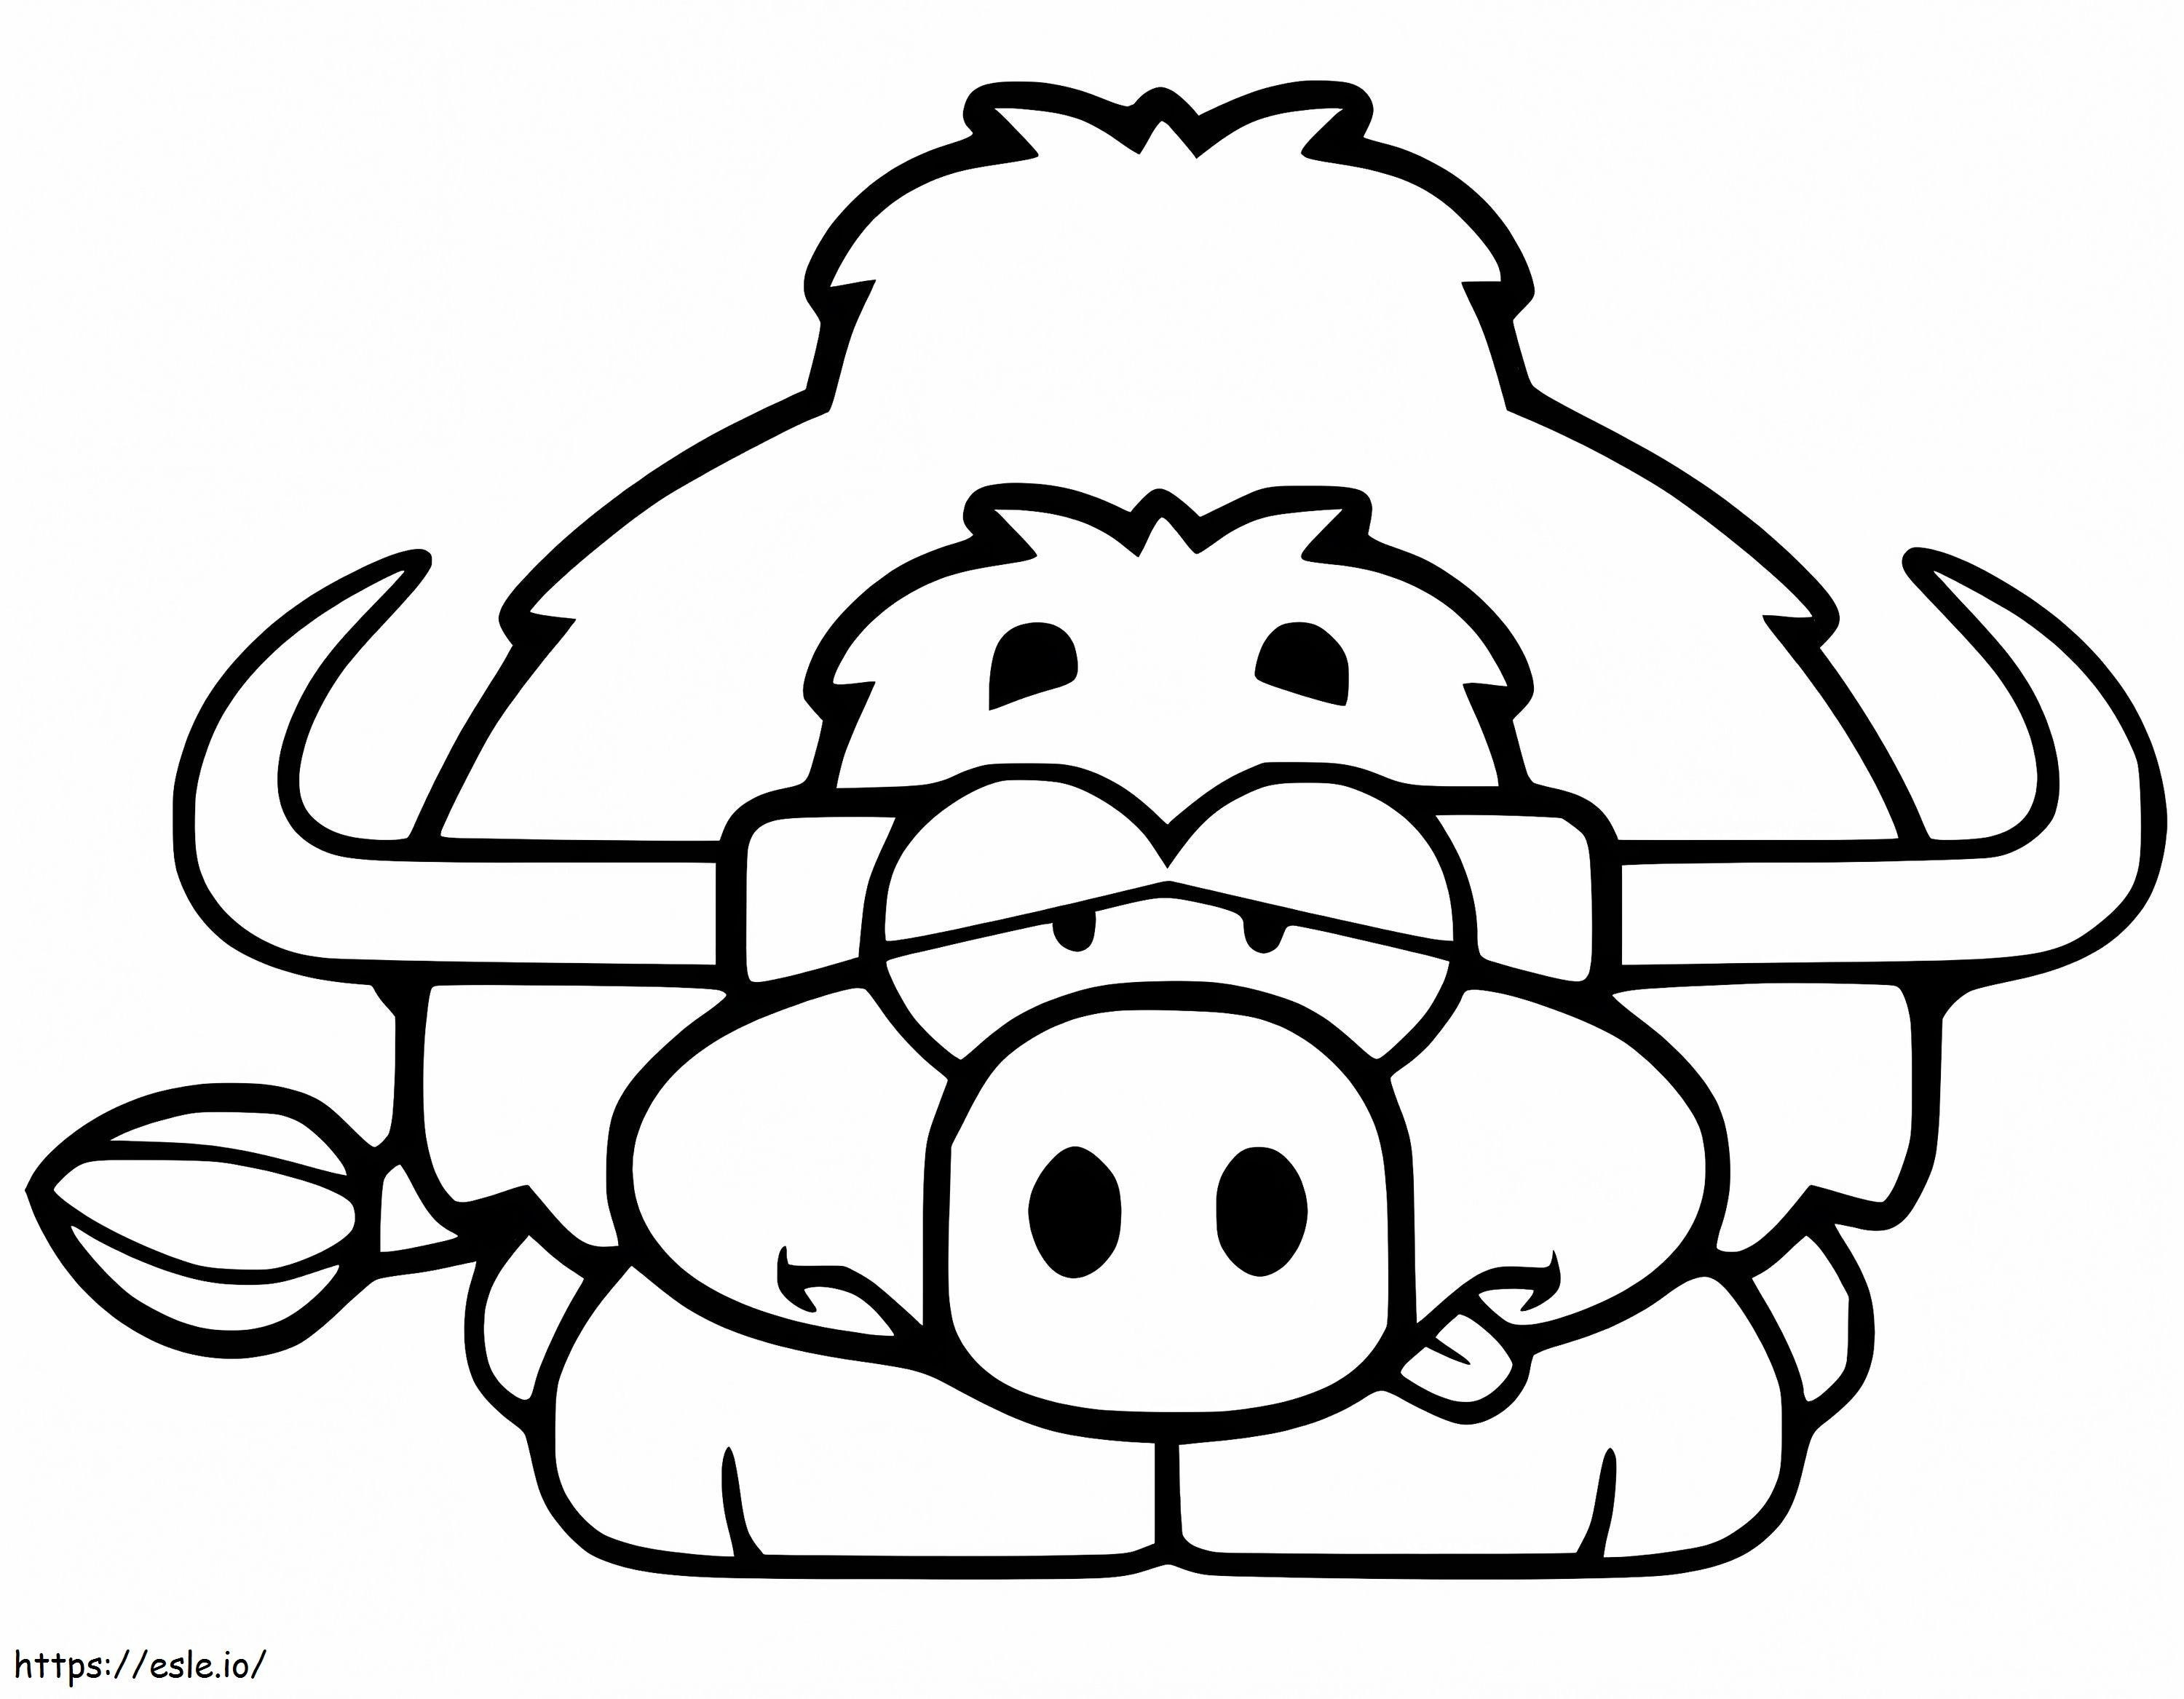 Tired Yak coloring page